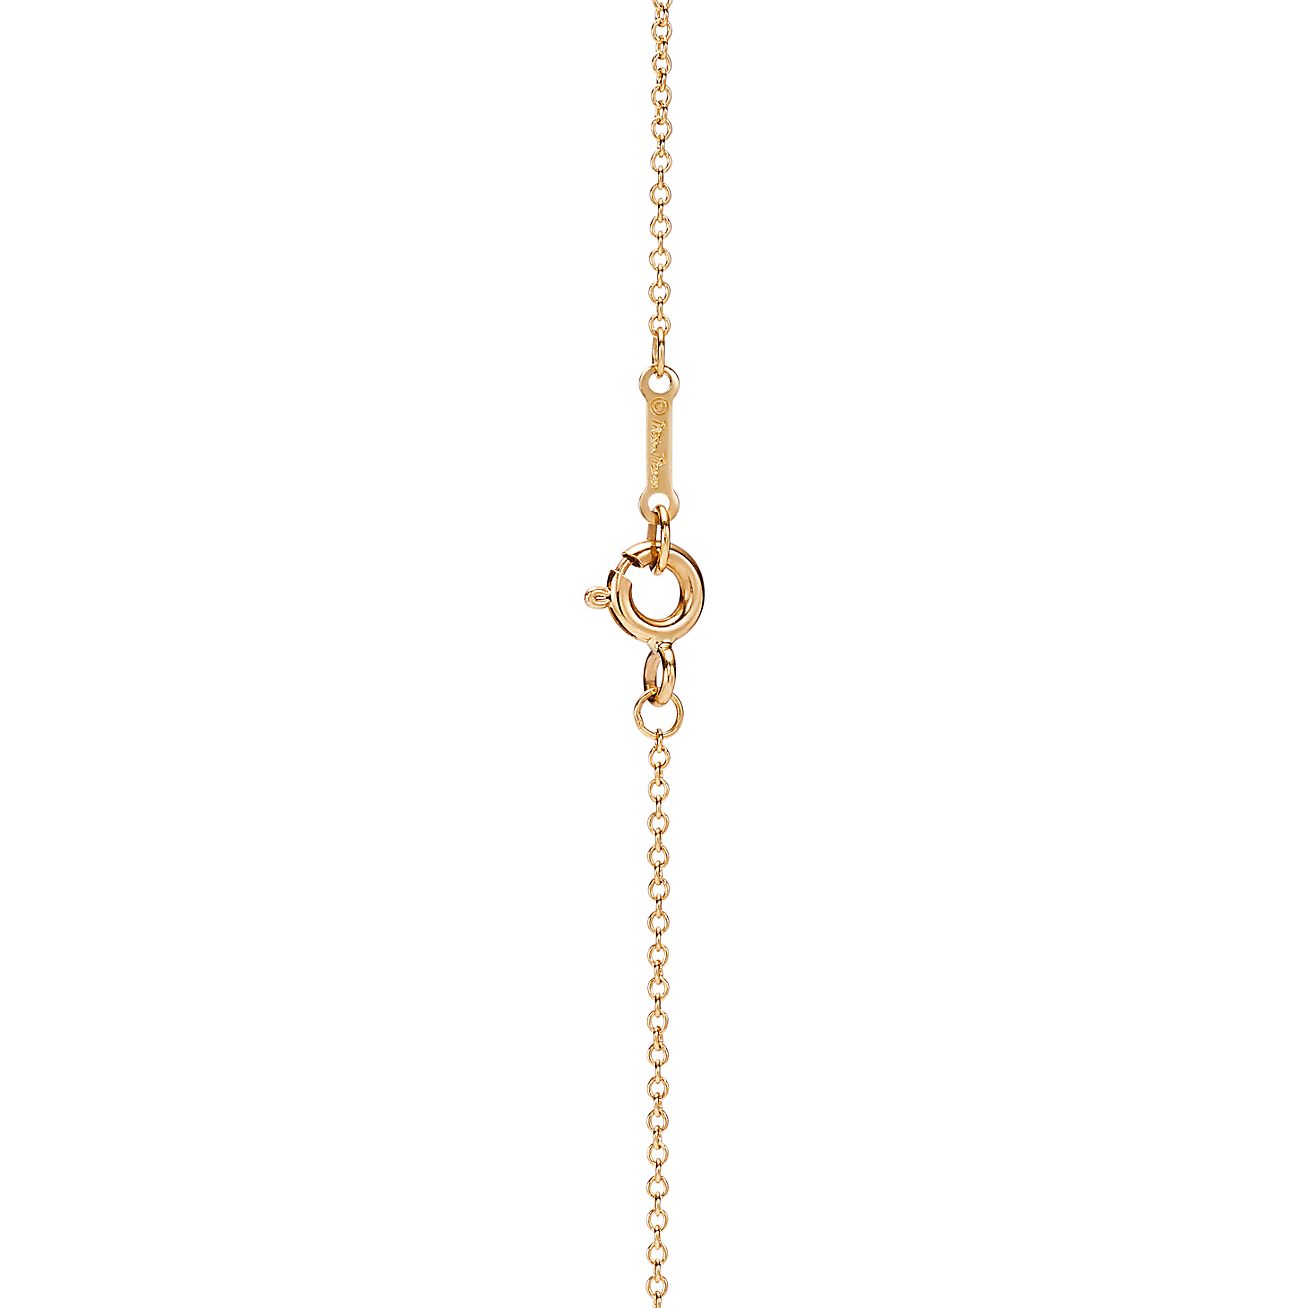 Paloma Picasso® Olive Leaf pendant in 18k gold with a freshwater 